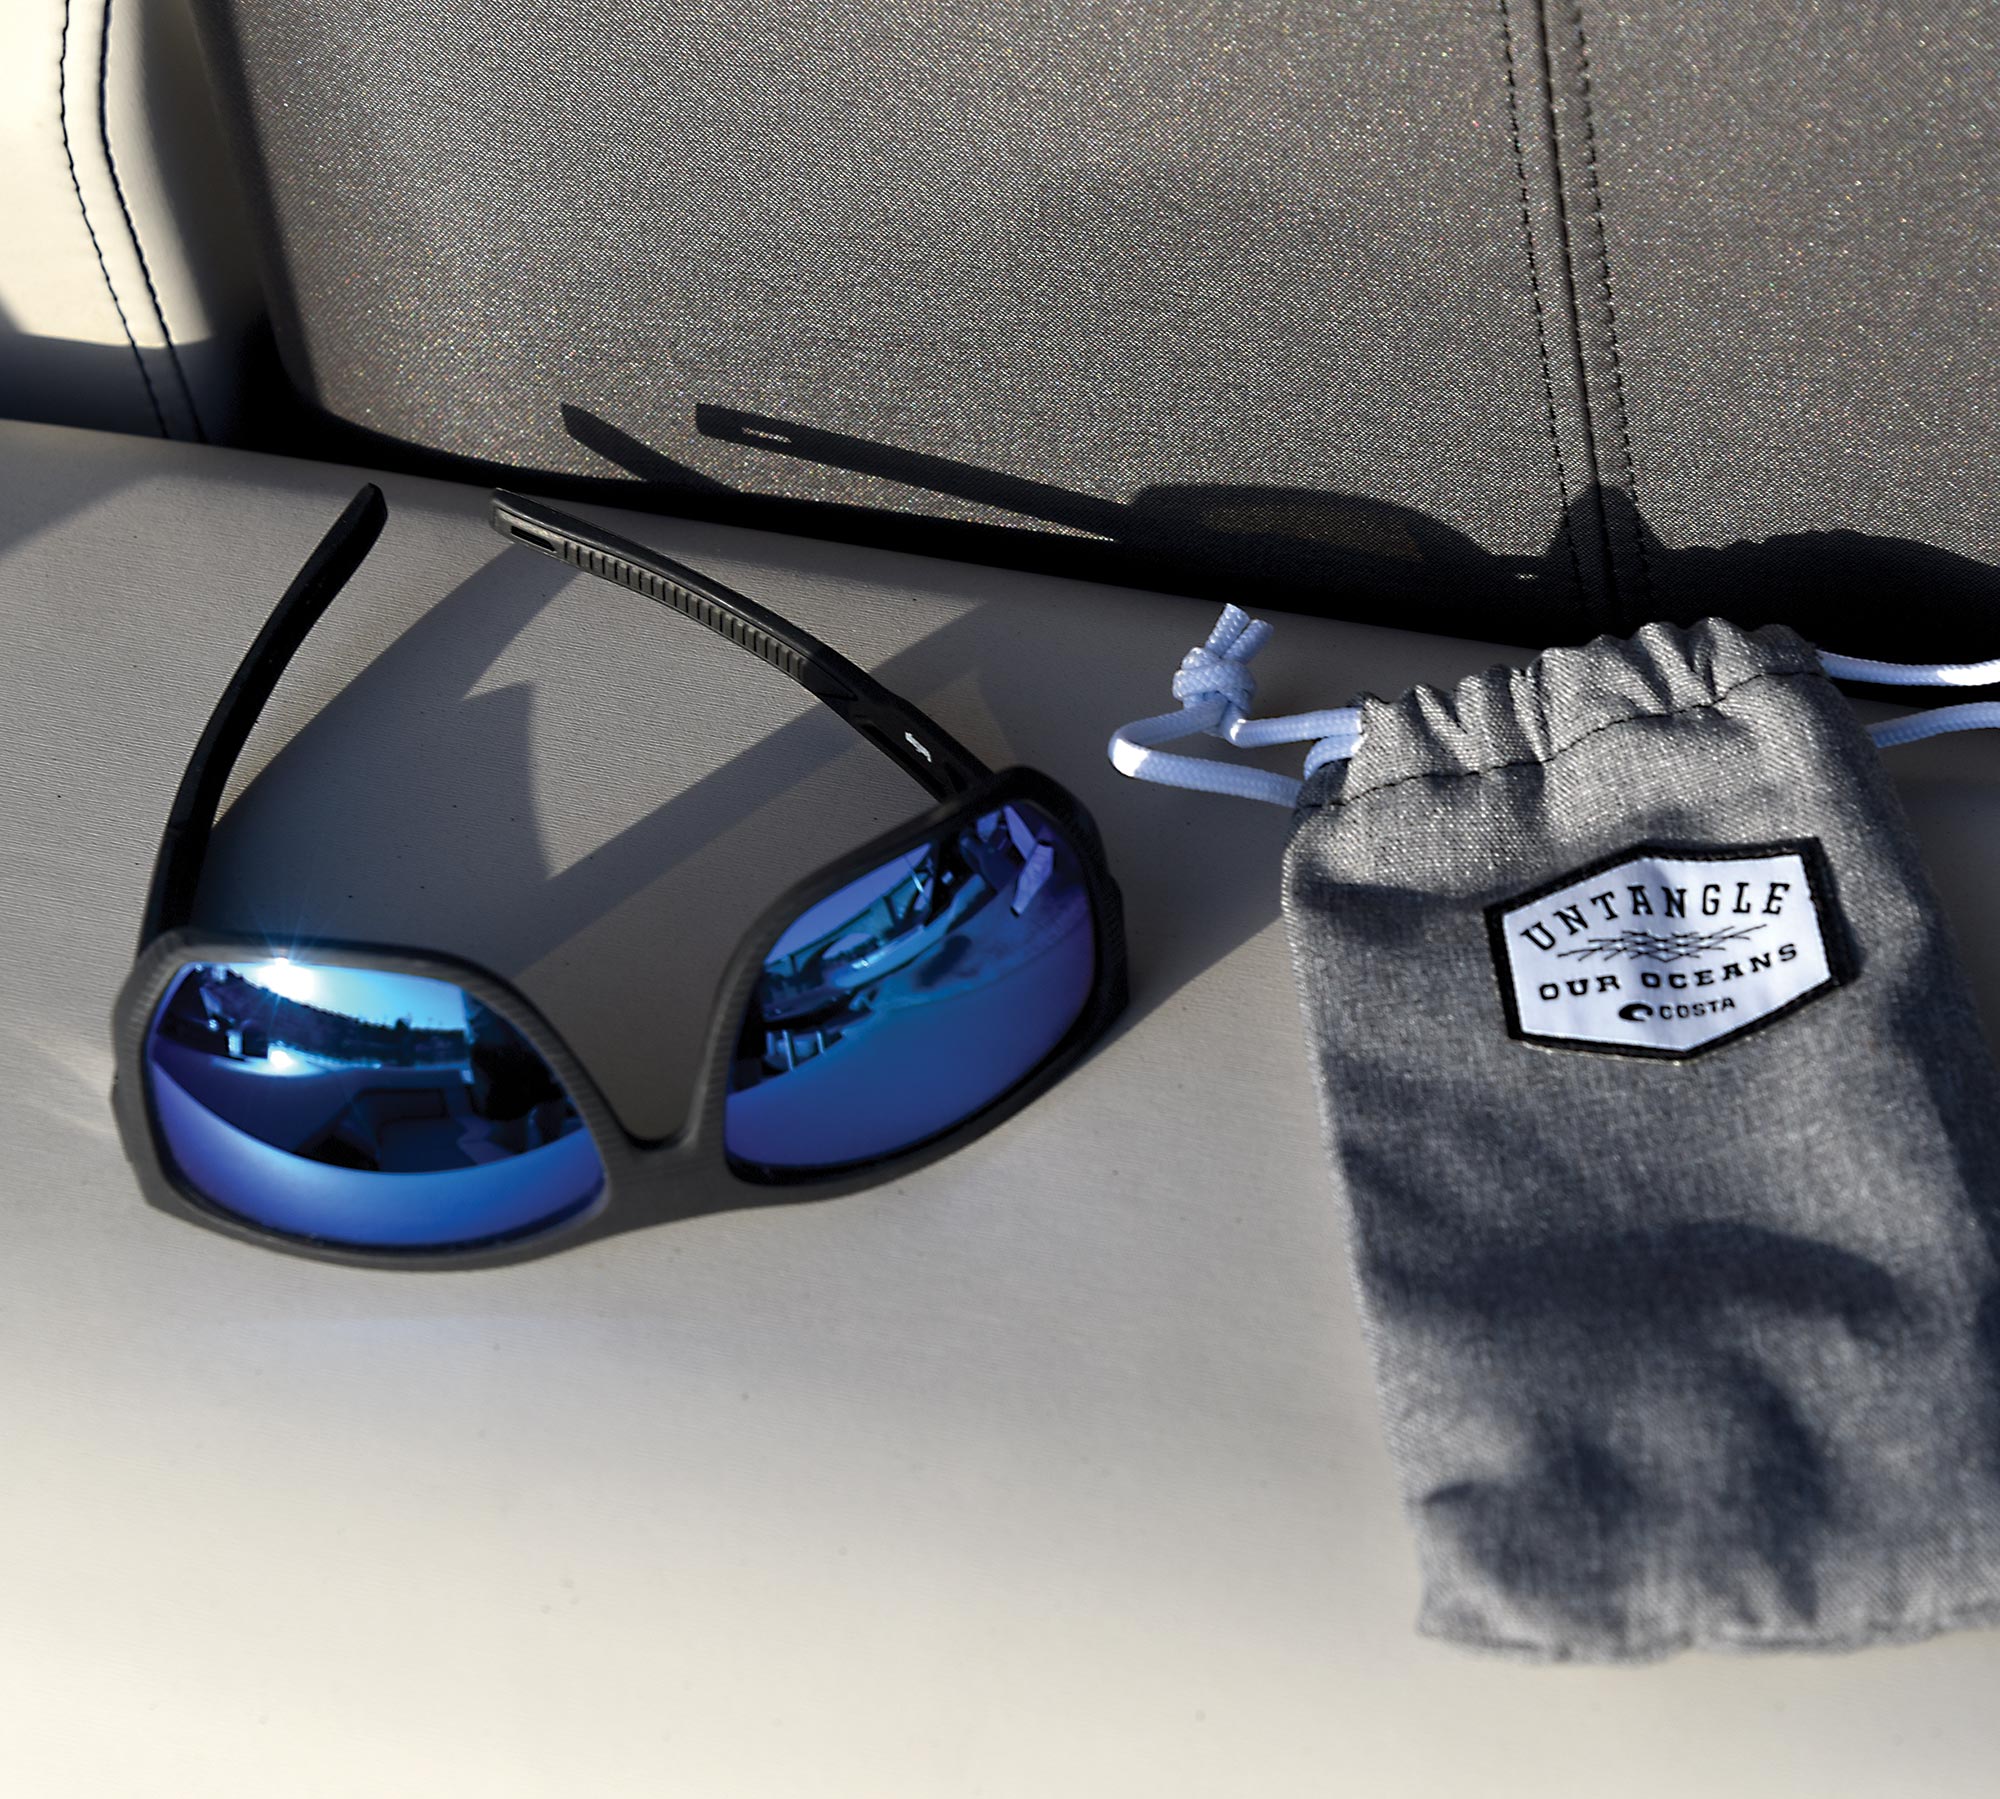 Costa Del Mar Santiago Untangled Sunglasses (blue tinted inner frame and black outer frame) sit upside down next to its grey protective cover case